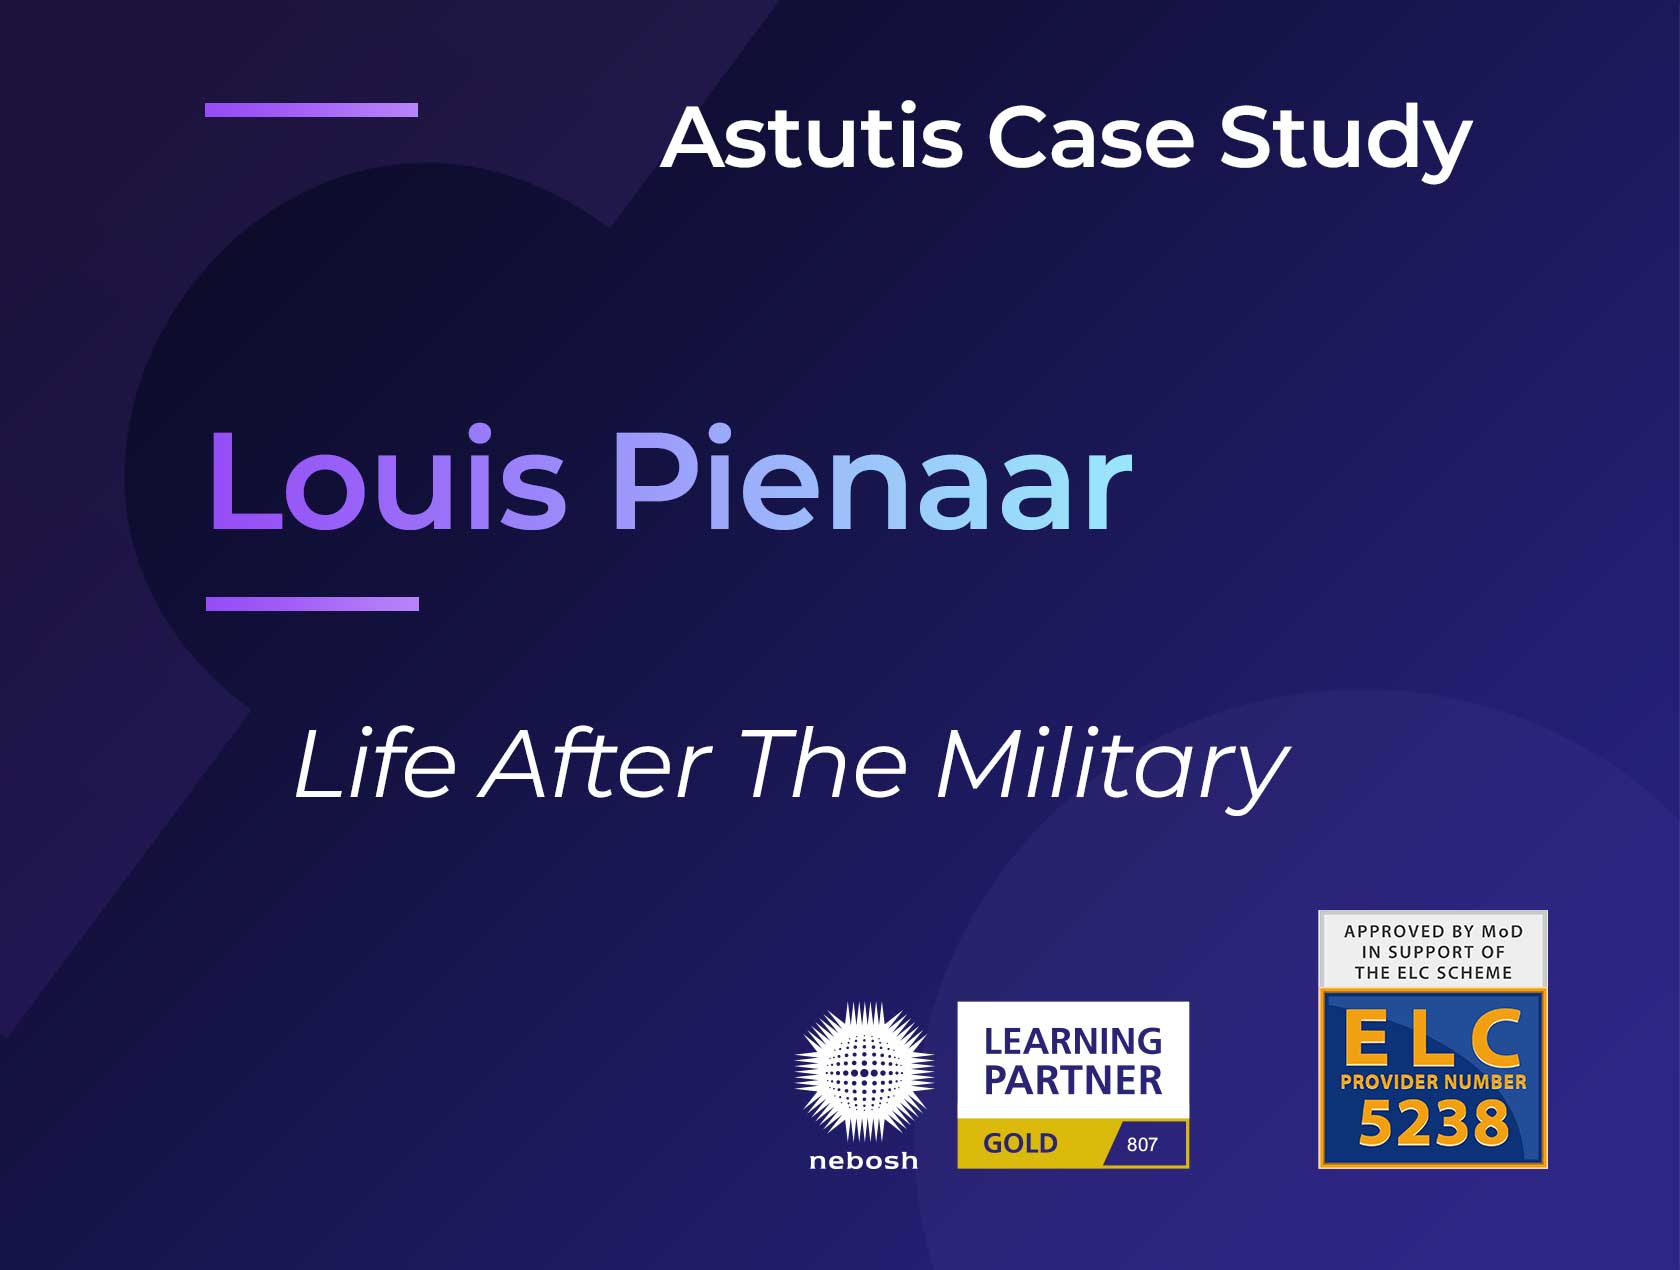 Louis Pienaar: Life After the Military